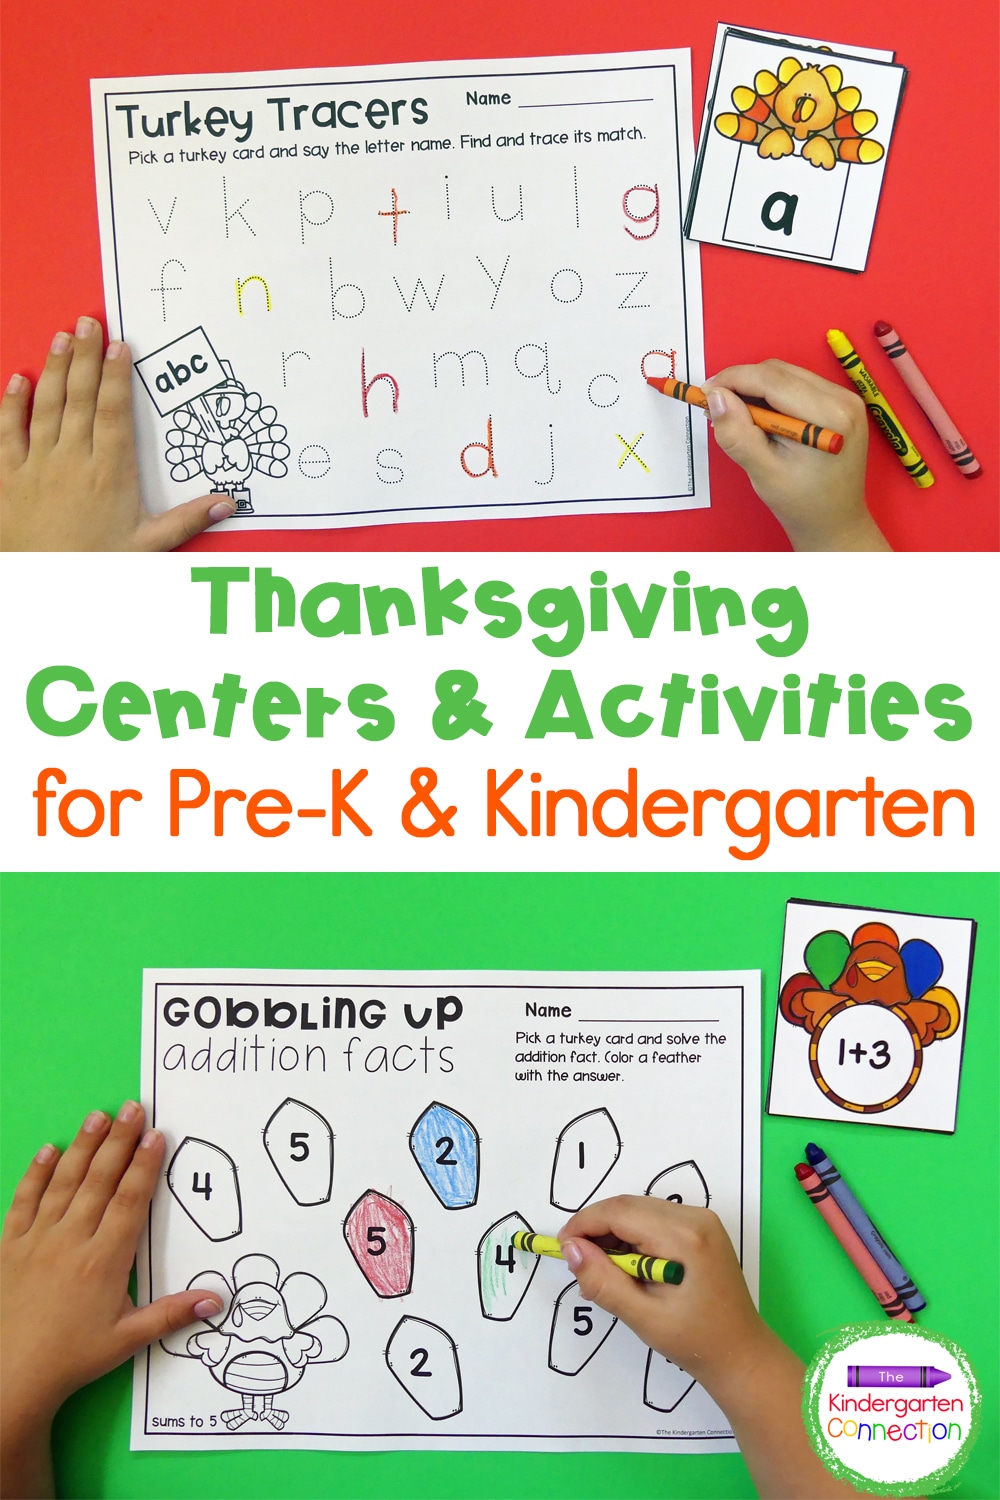 Grab these Thanksgiving Activities and Centers for Pre-K & Kindergarten and have fun, engaging, and hands-on centers planned for the month!